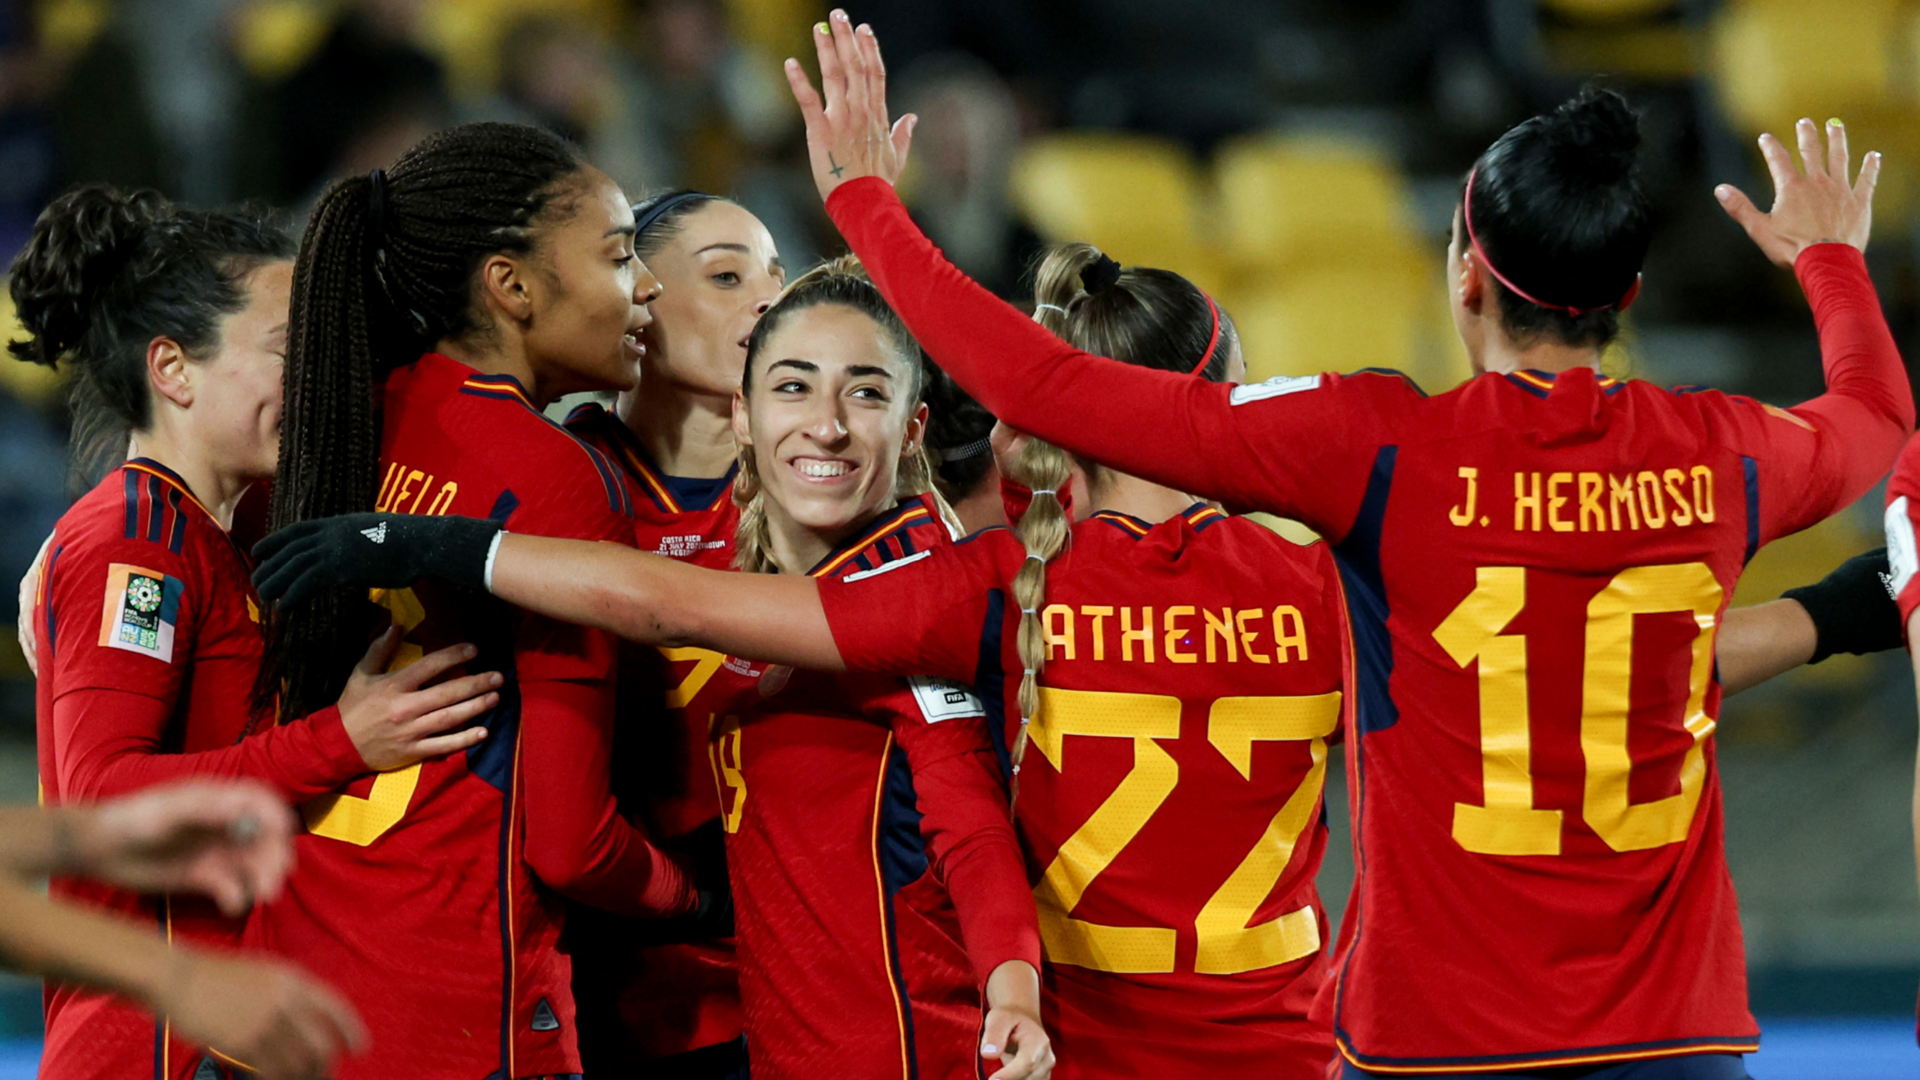 46 shots! Spain rise above the mutiny as Costa Rica goalkeeper Daniela Solera spares her side getting absolutely obliterated at Womens World Cup Goal US